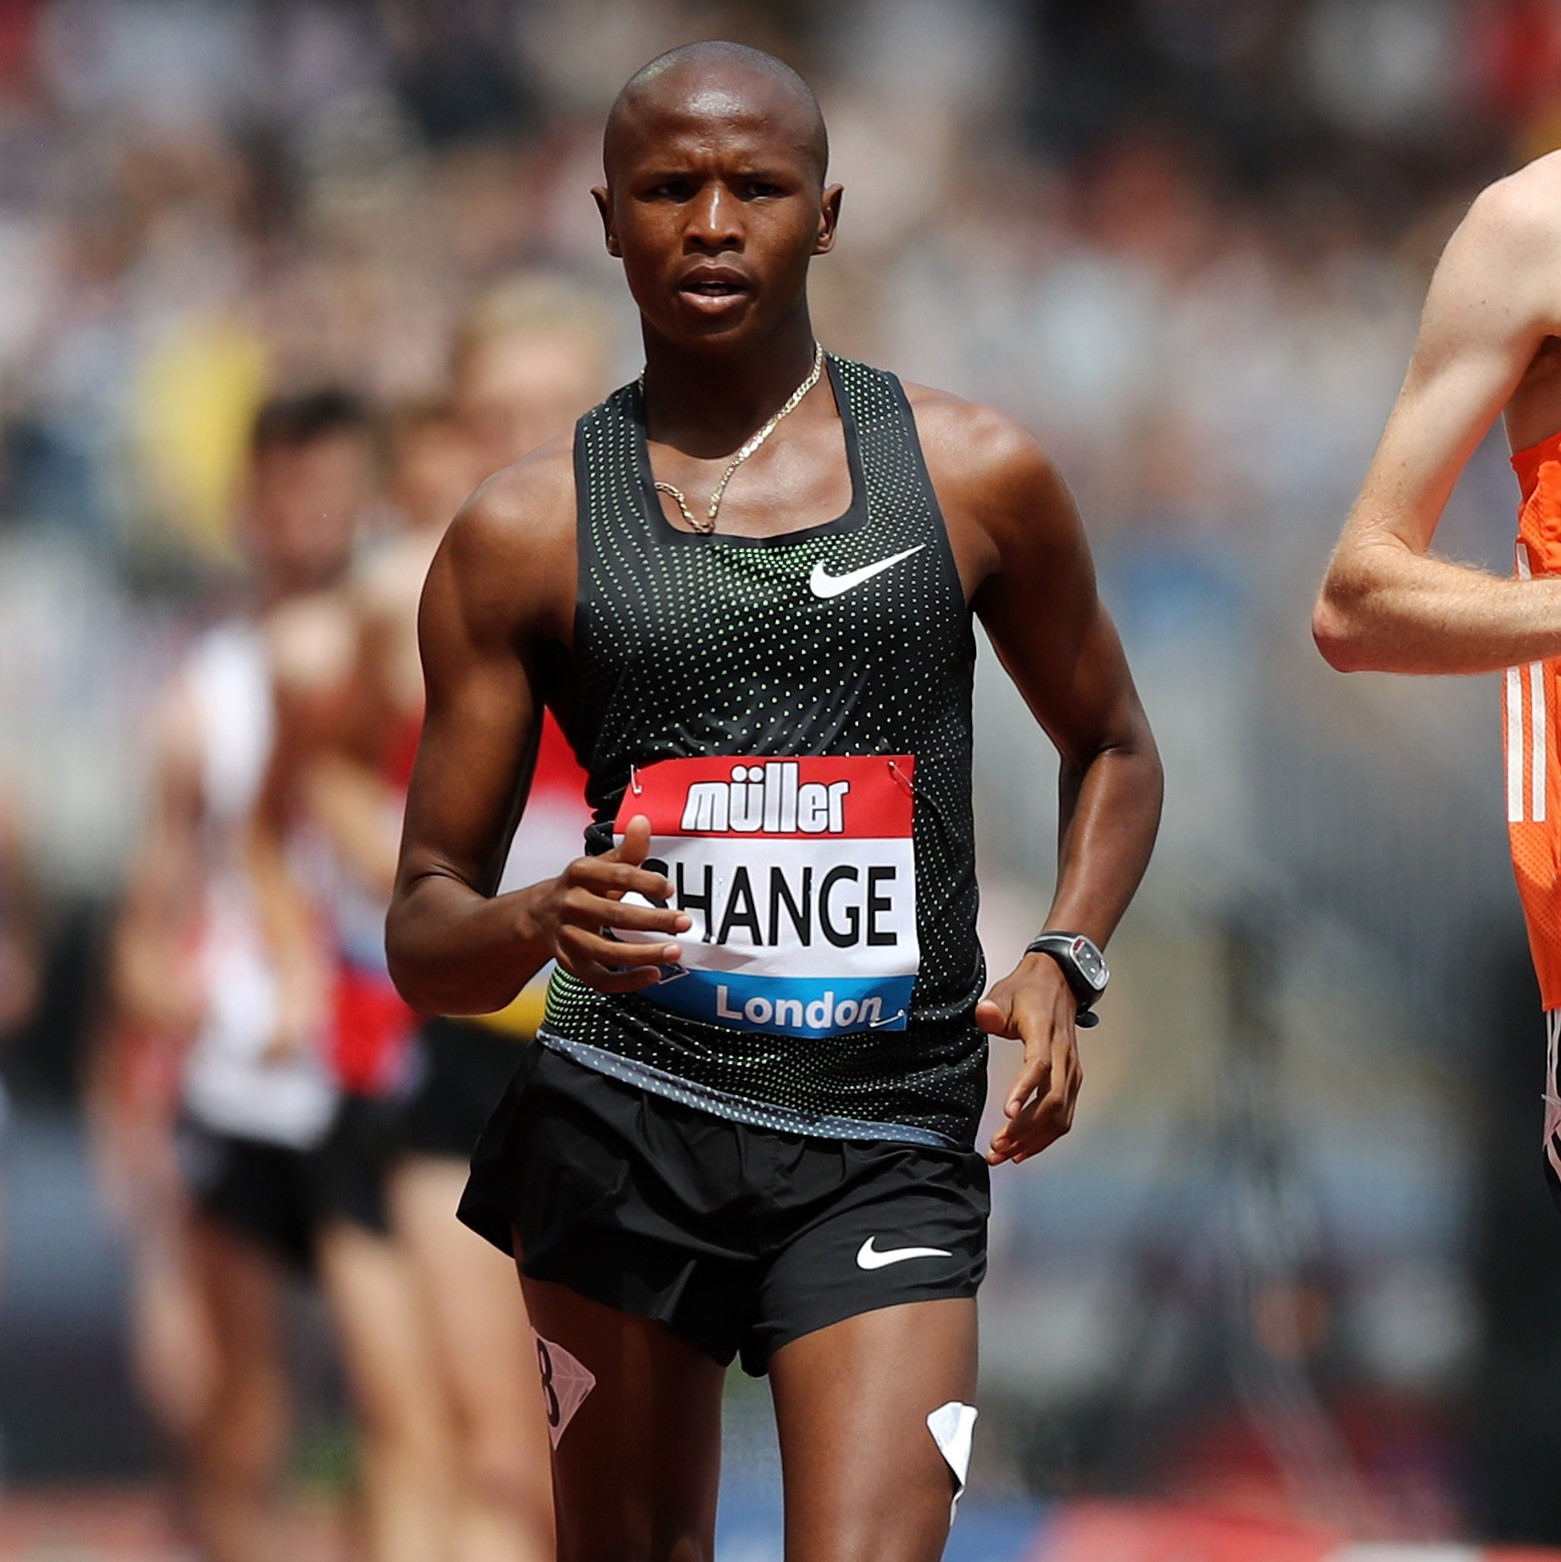 South African Olympic race walker Shange jailed for rape